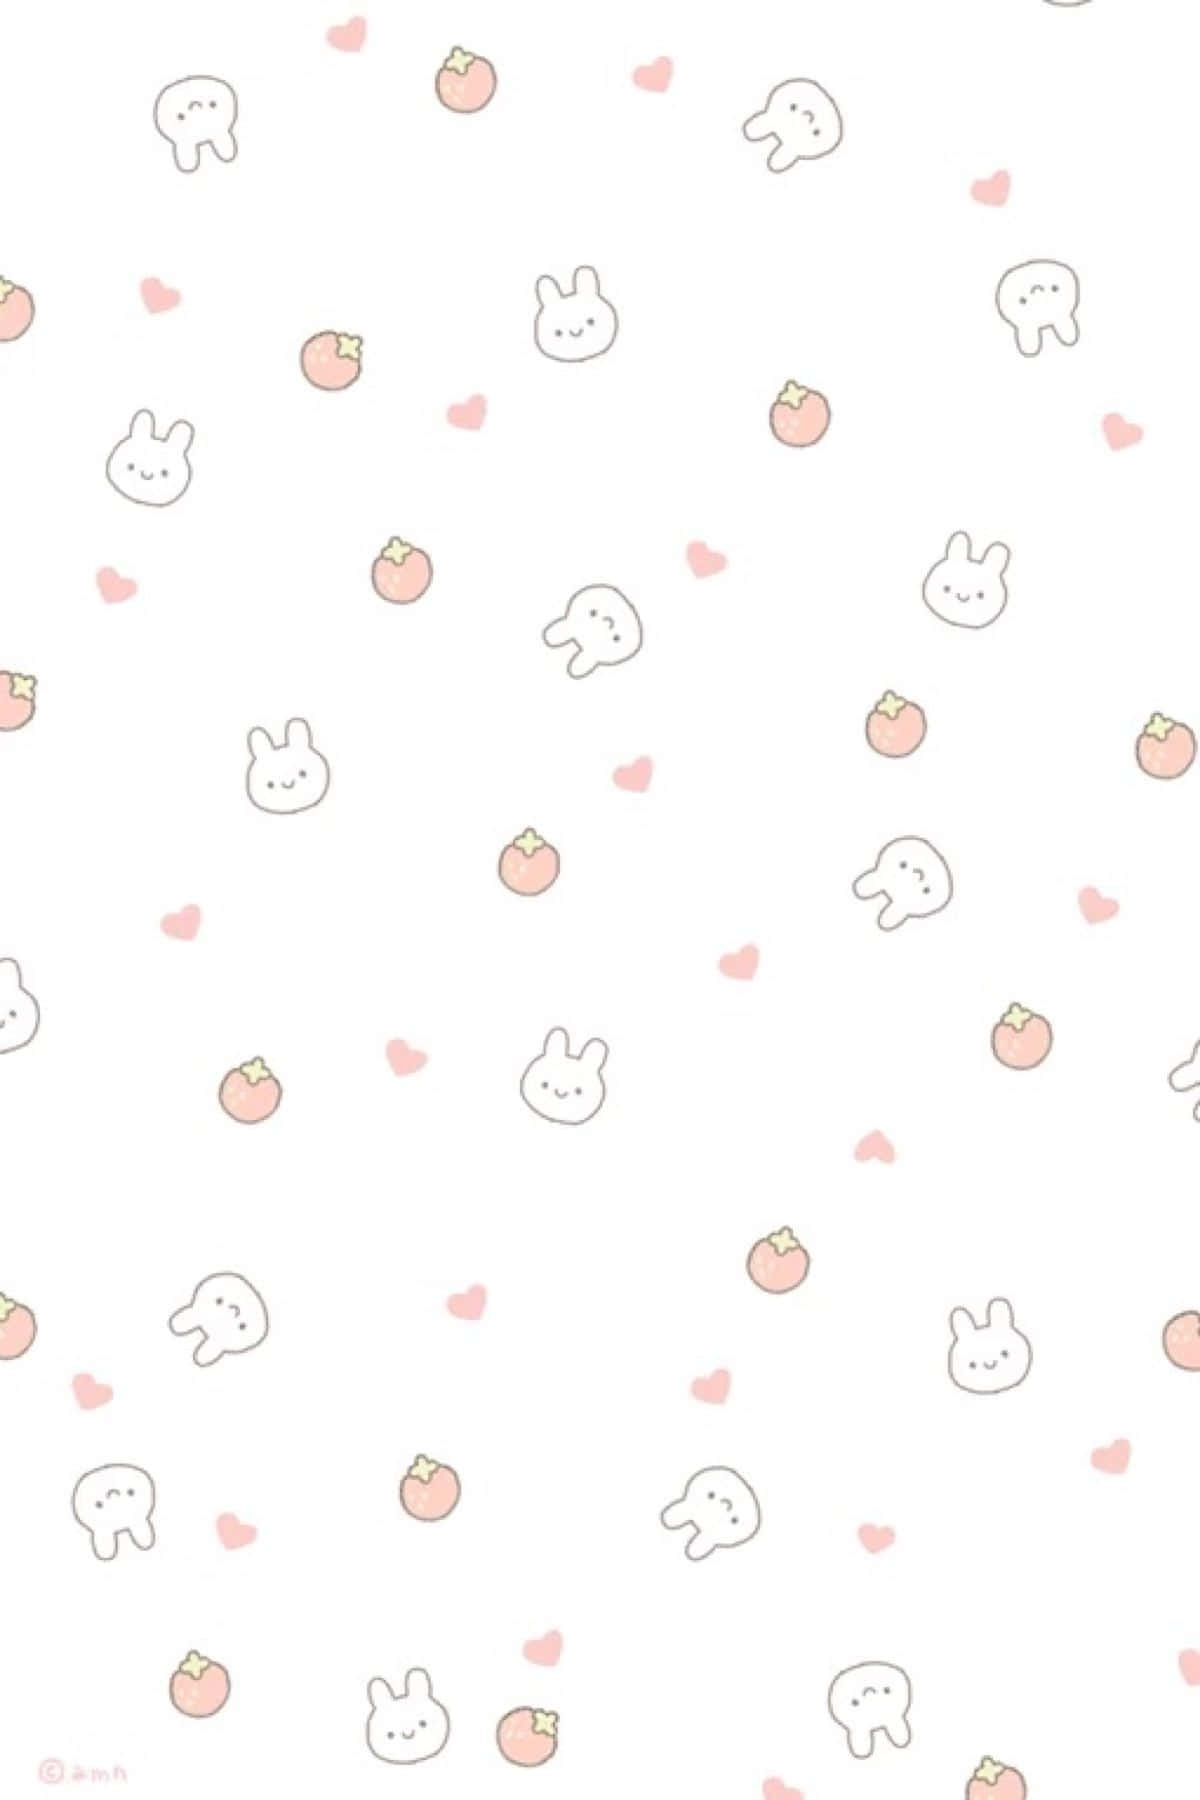 Cute Background With Bunnies And Hearts